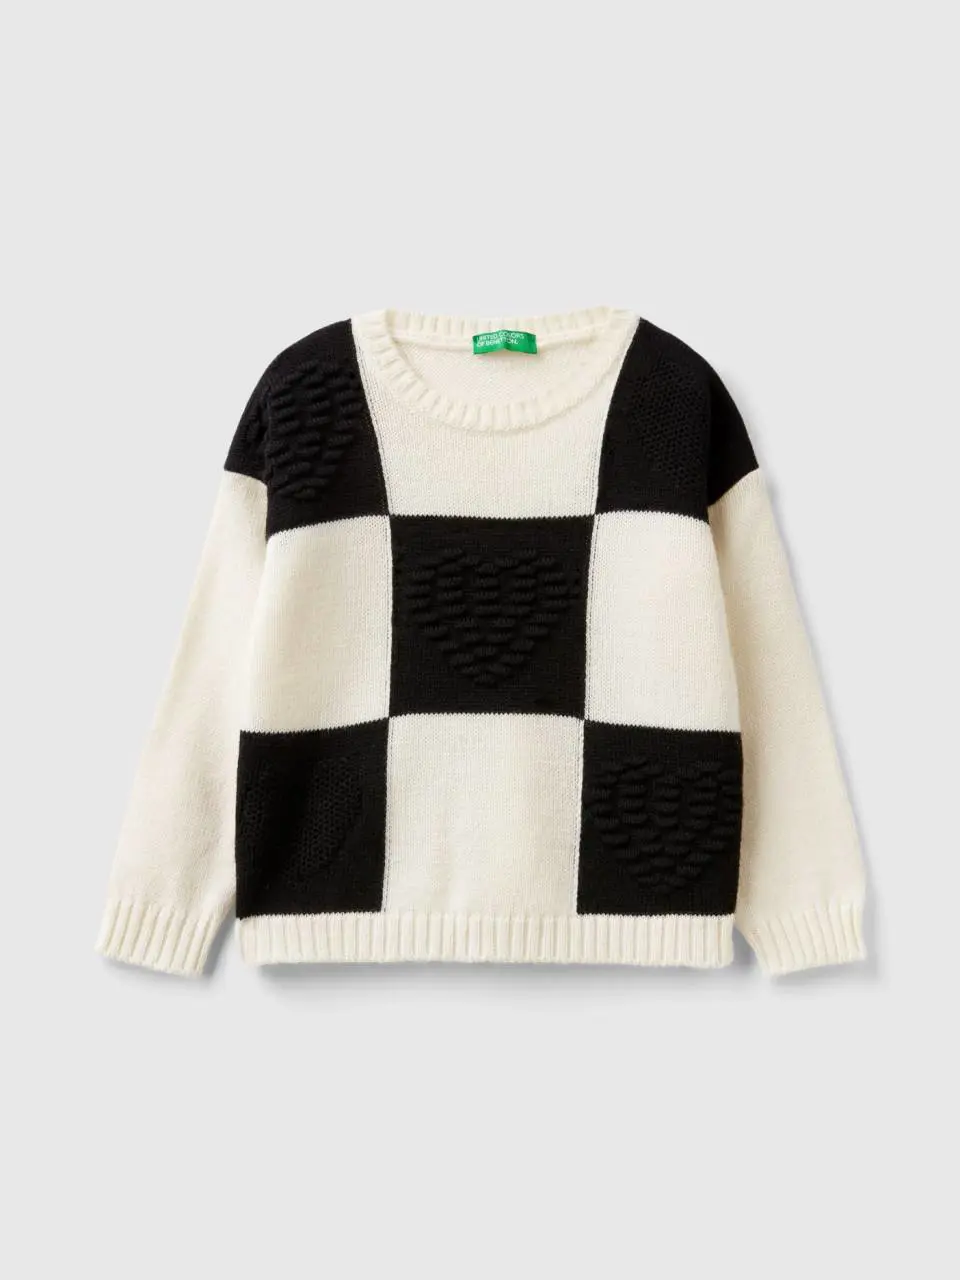 Benetton checkered sweater with hearts. 1